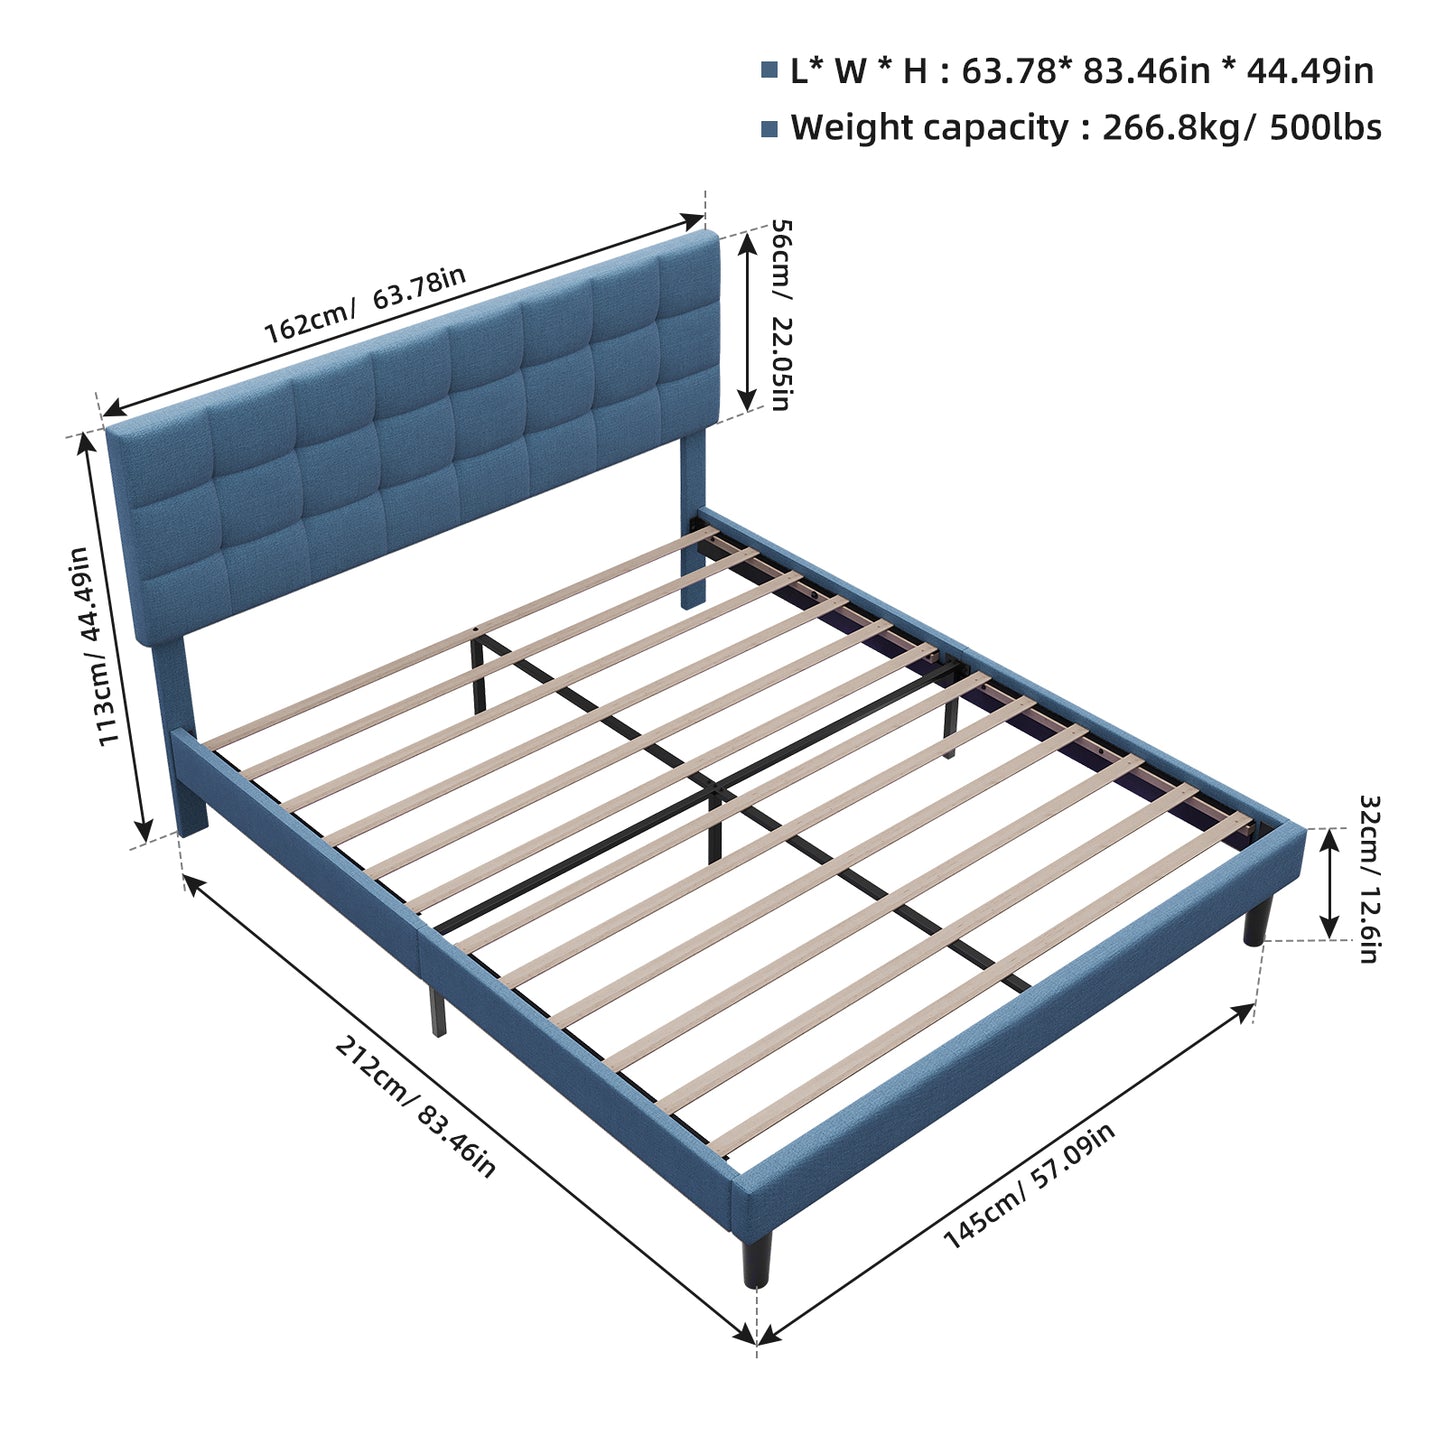 HSUNNS Qunee Bed Platform Bed with Lights, Queen Size Lighted Upholstered Bed Frame with Bed Canopy, Upholstered Platform Bed with Adjustable Headboard, No Box Spring Needed, Blue